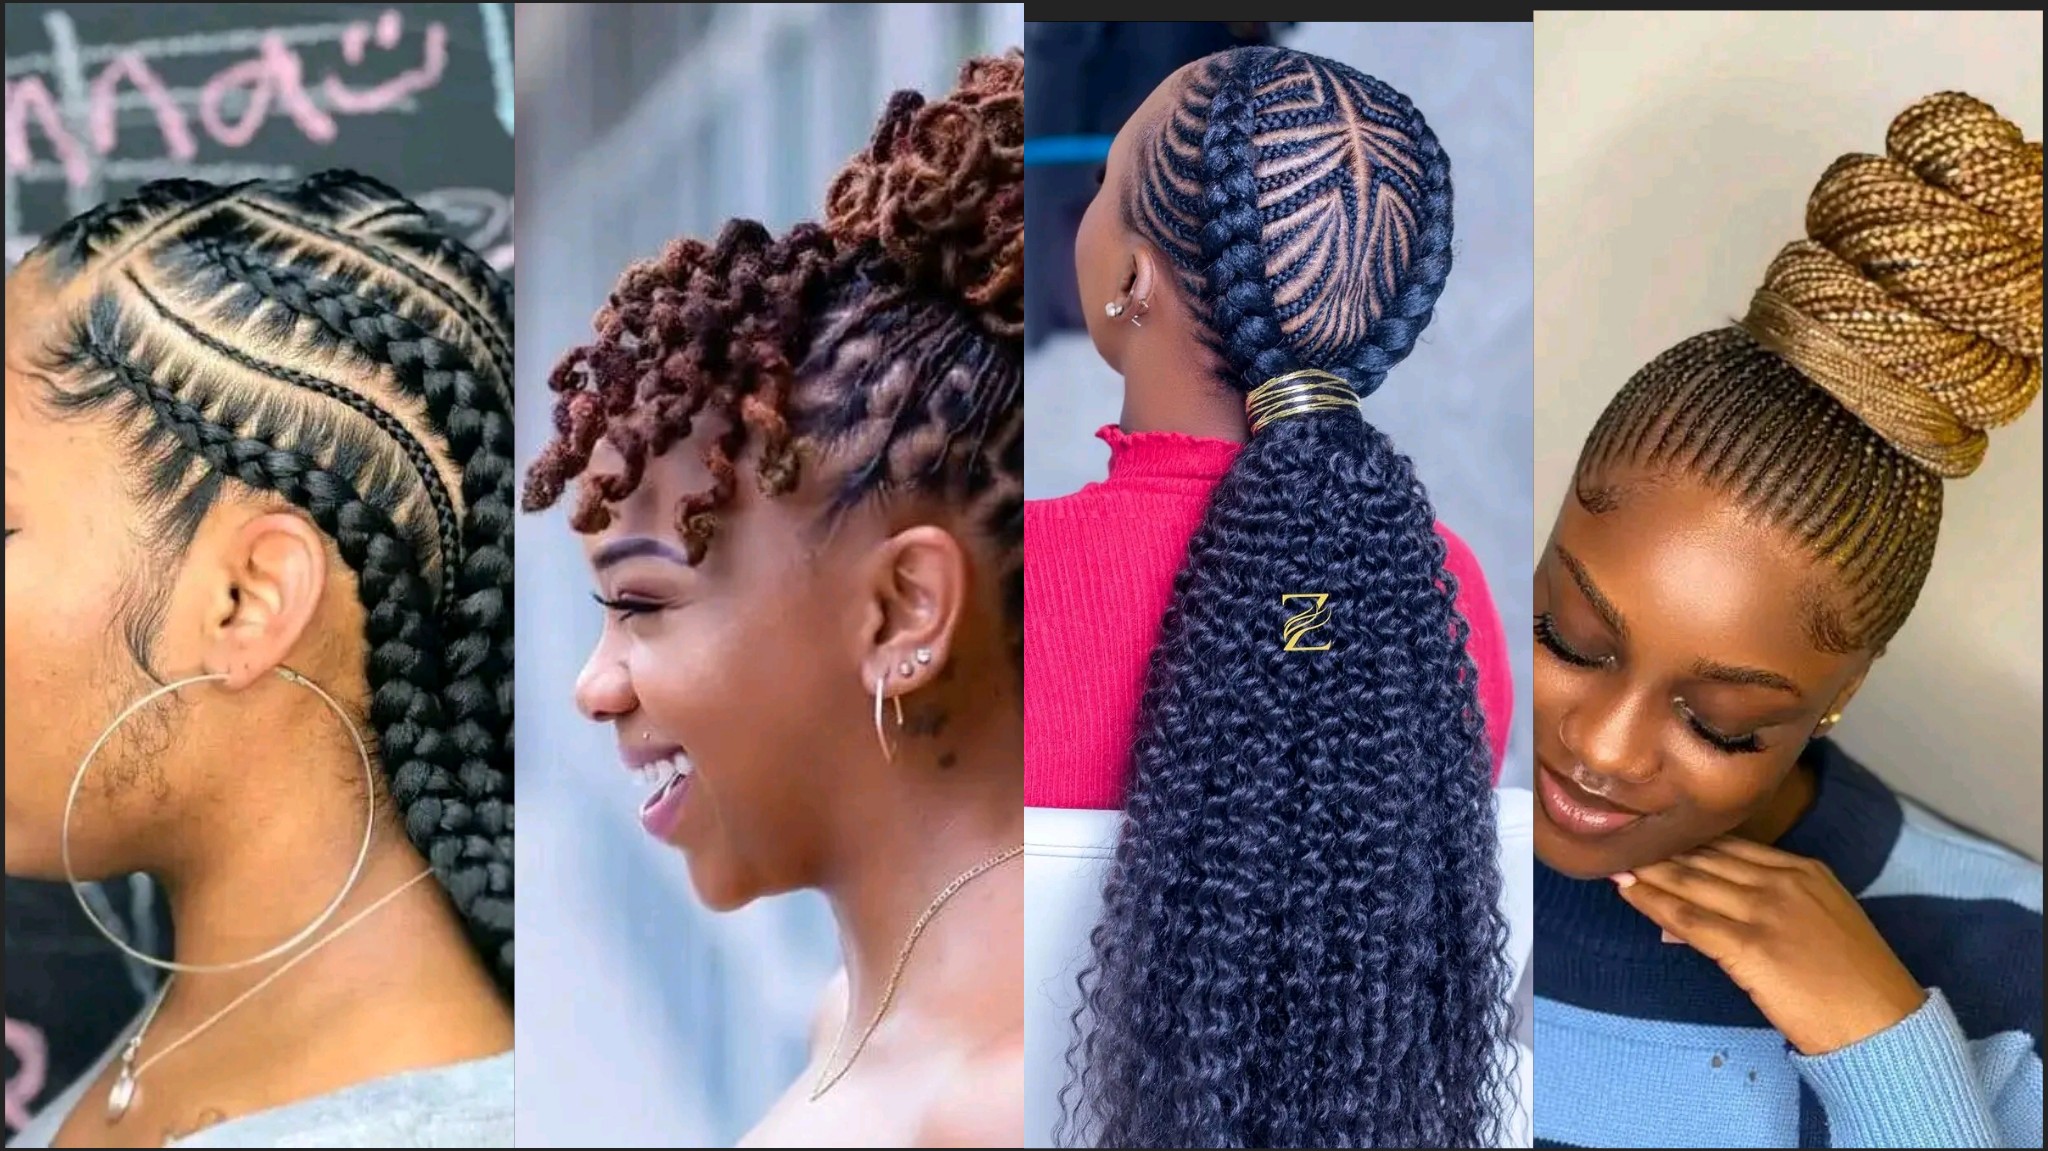 Pretty hairstyles for pr£tty ladies😍😍